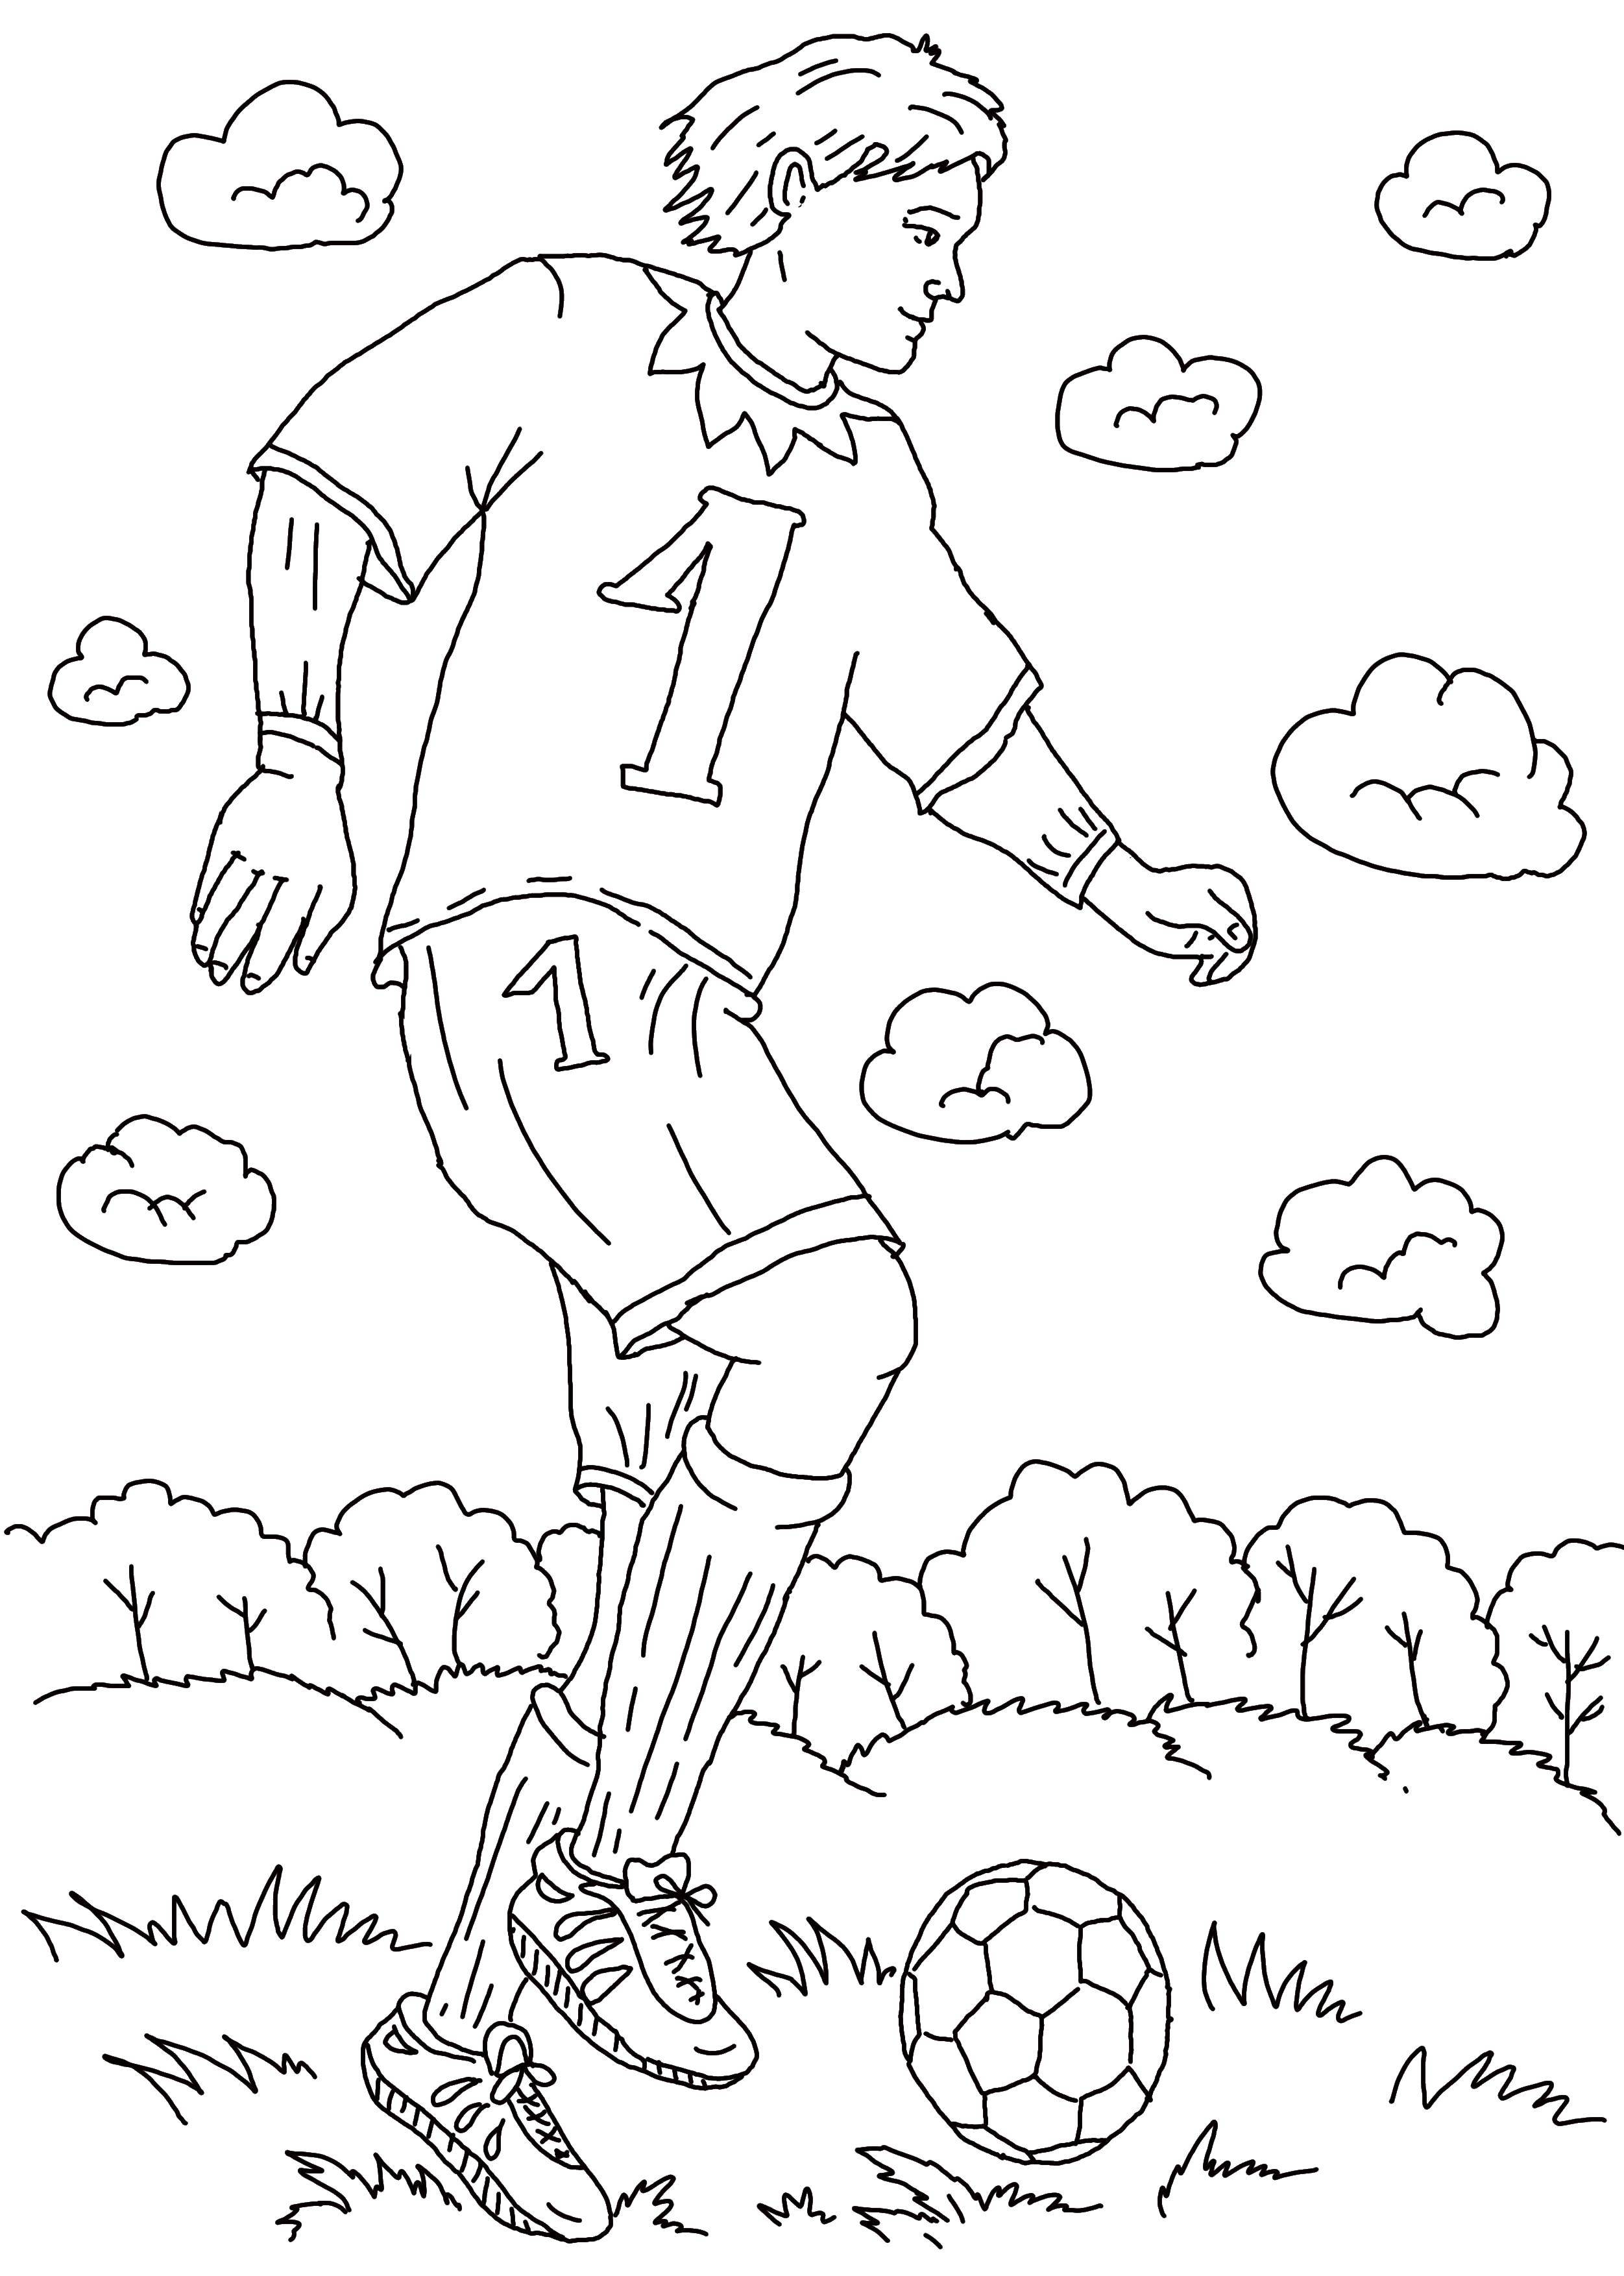 Coloring The boy plays football. Category sports. Tags:  sports, ball.